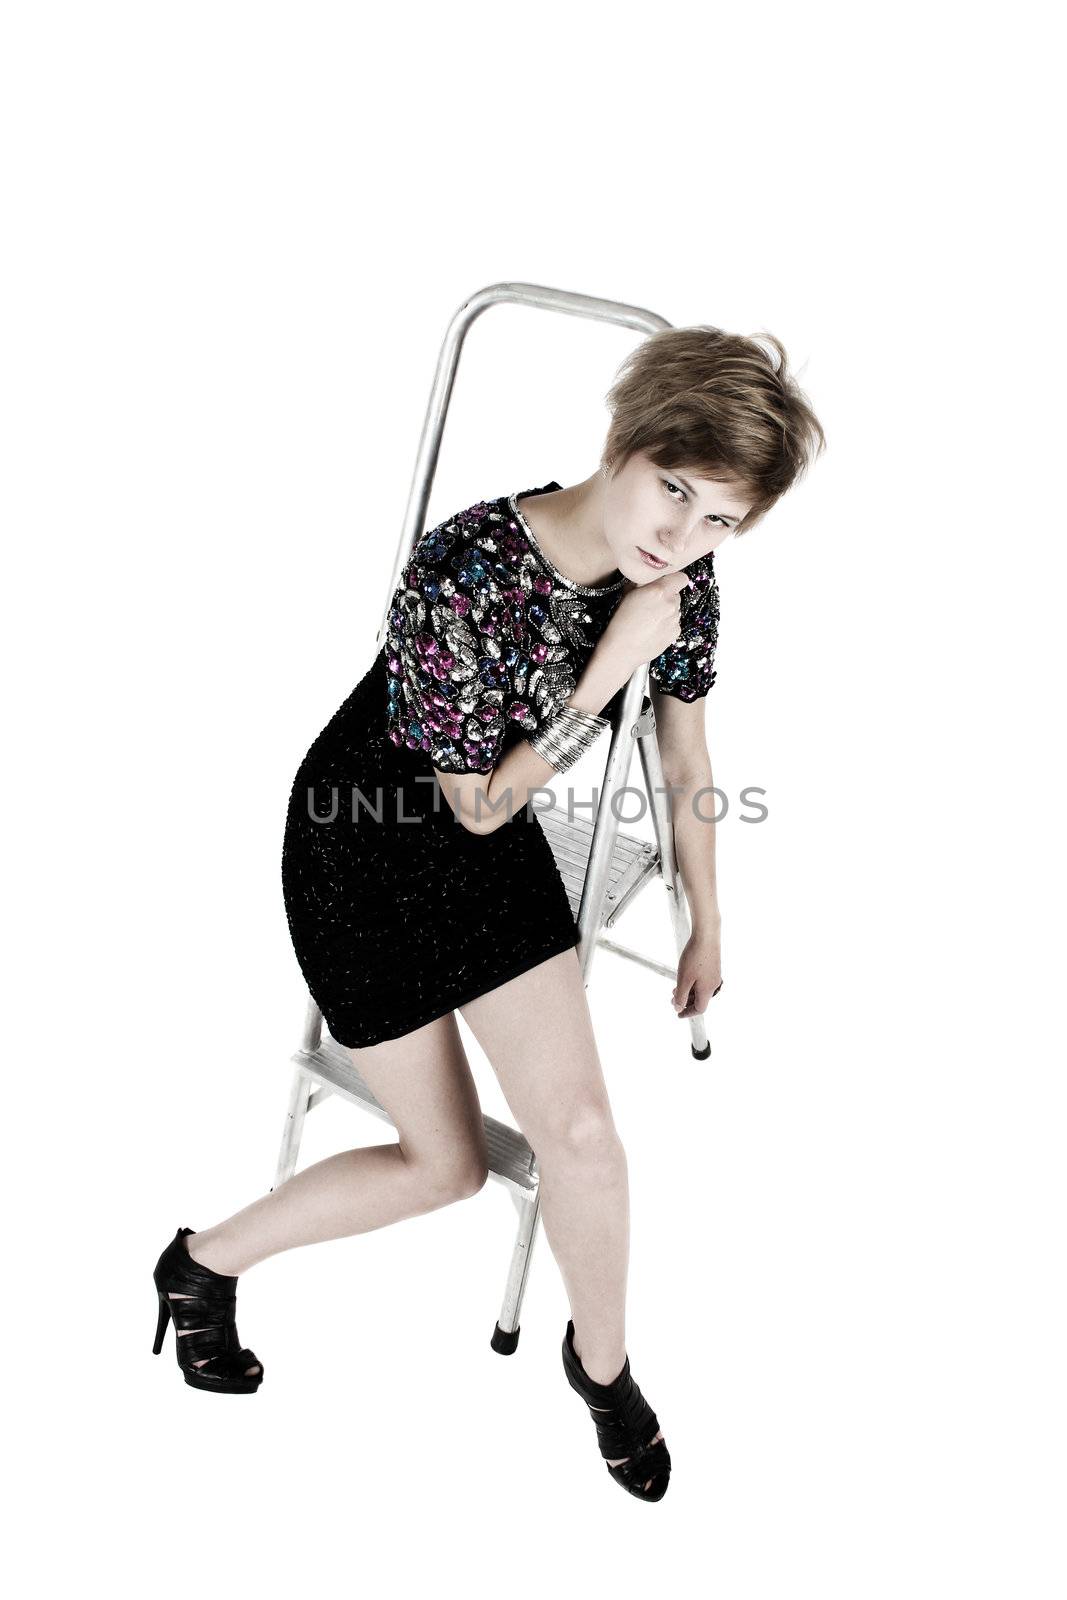 Model on Step-ladder by vanell